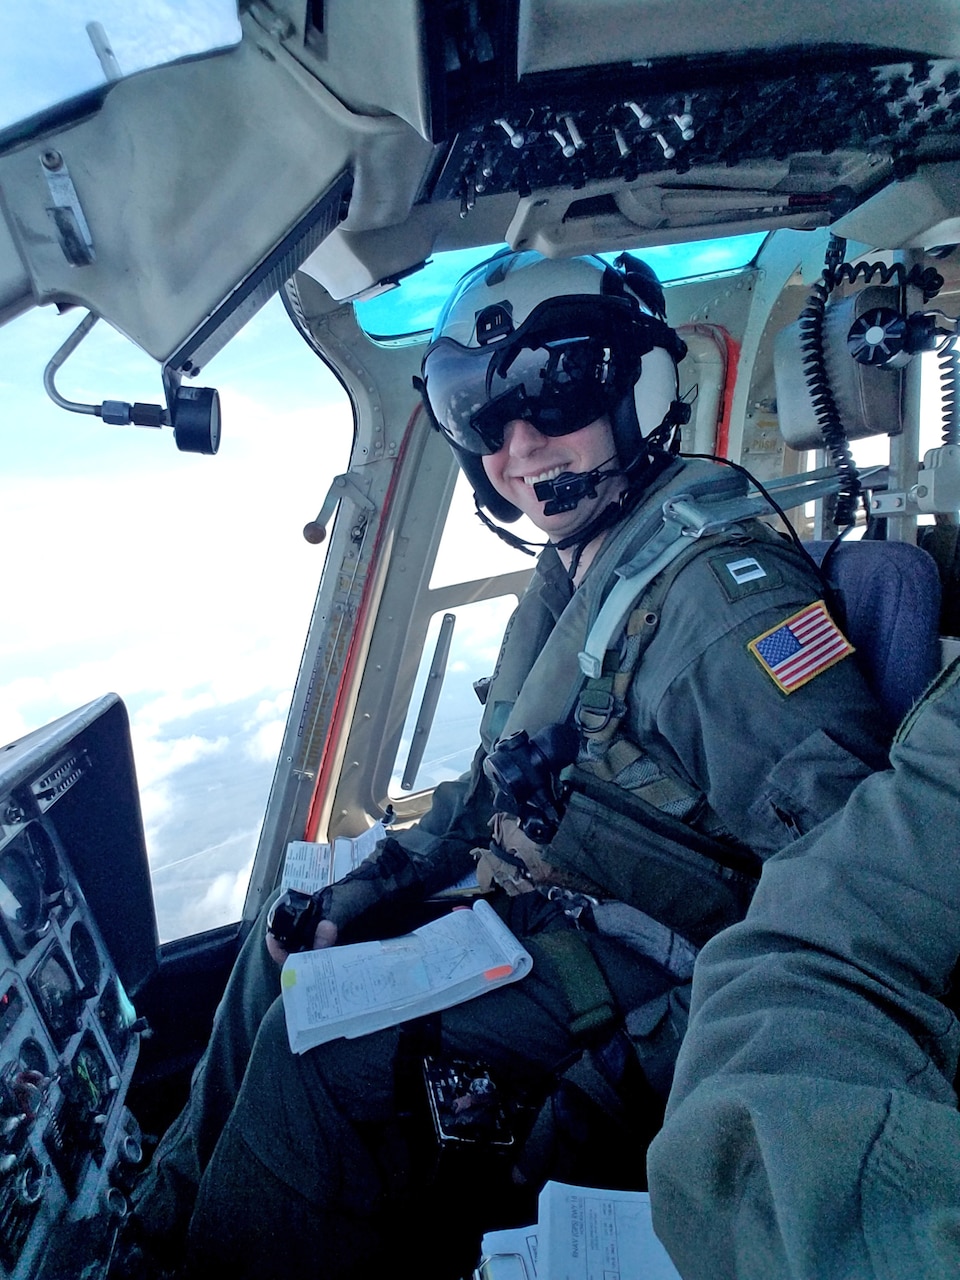 Lt. Cmdr. David Rozovski flies during his instrument solo in advanced flight training at Naval Air Station Whiting Field, Florida, in August 2017.